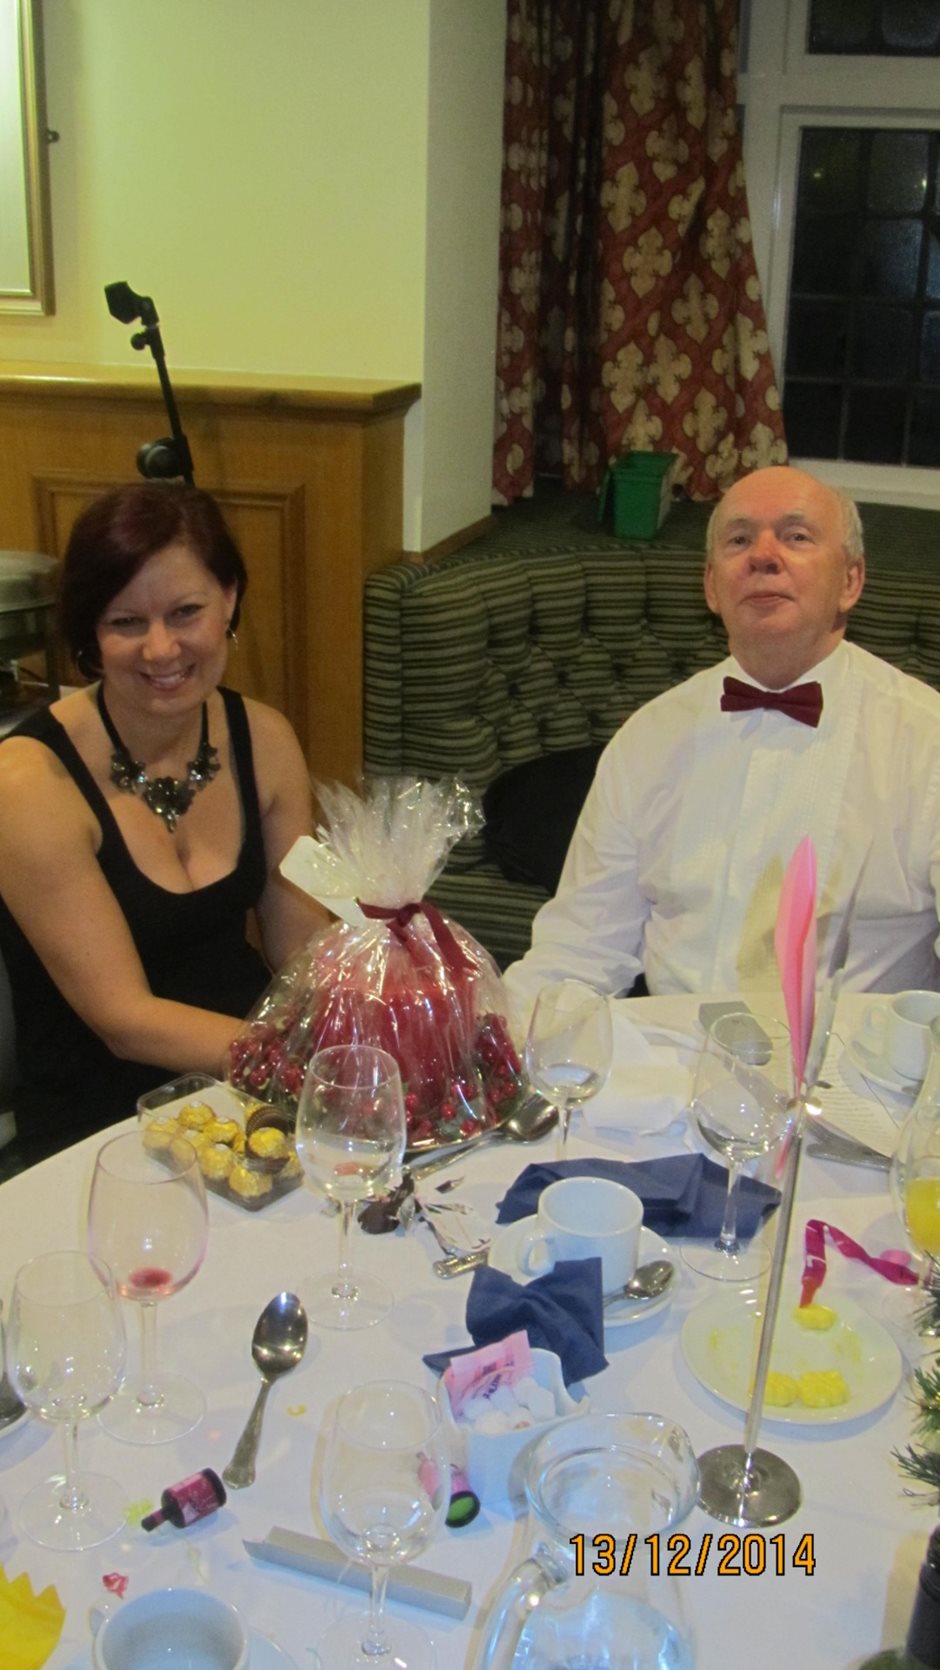 Photo 45 from the R29 2014 Christmas Dinner gallery